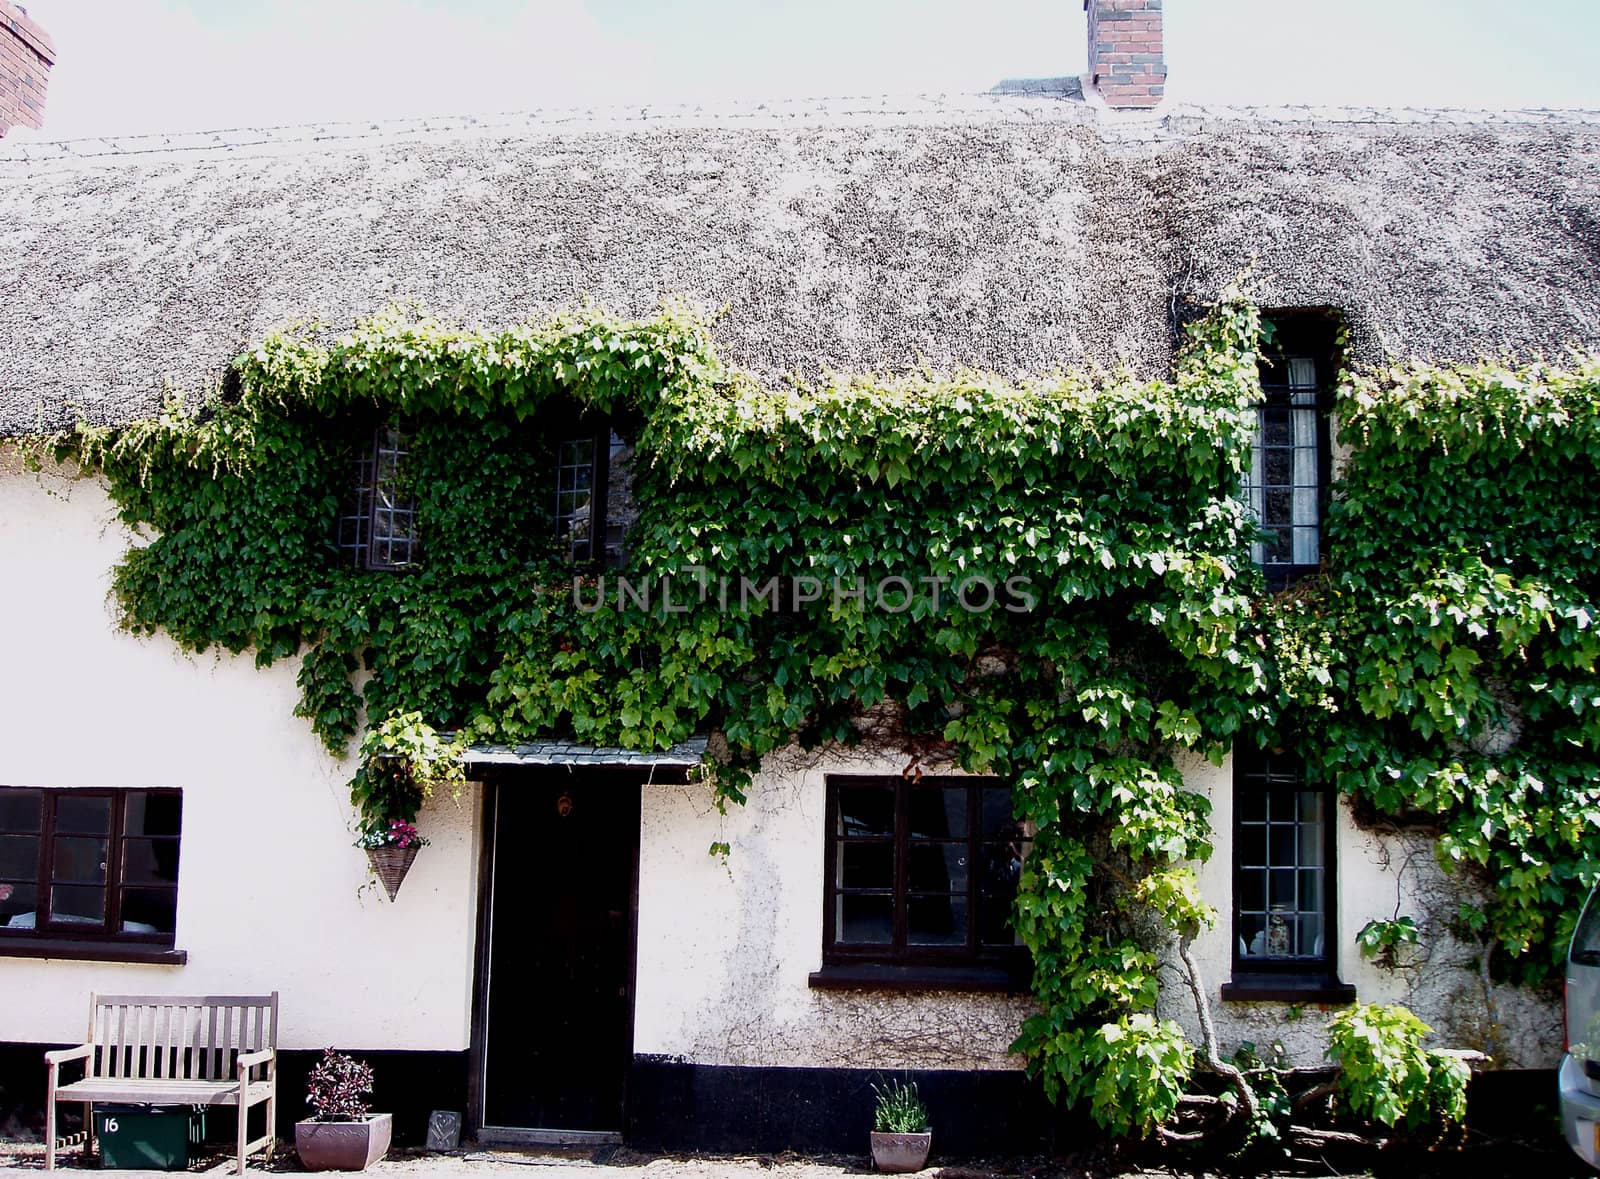 Village home in England, UK by jol66